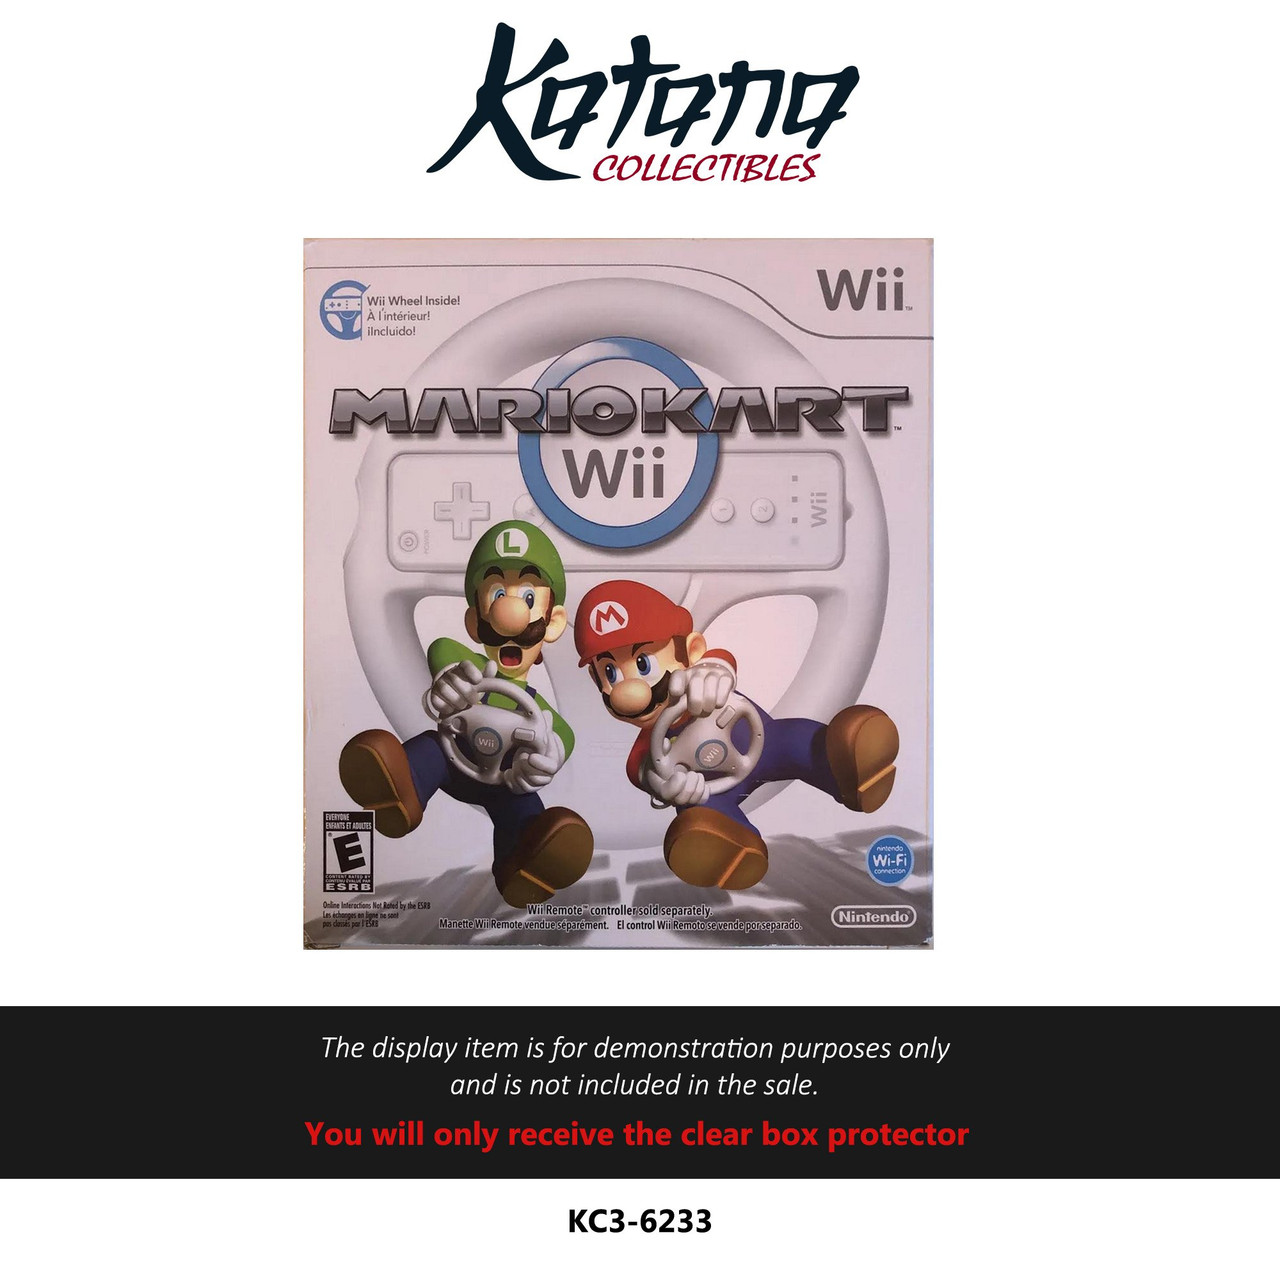 Protector For Mario Kart Wii With Wii Wheel Bundle - Katana Collectibles